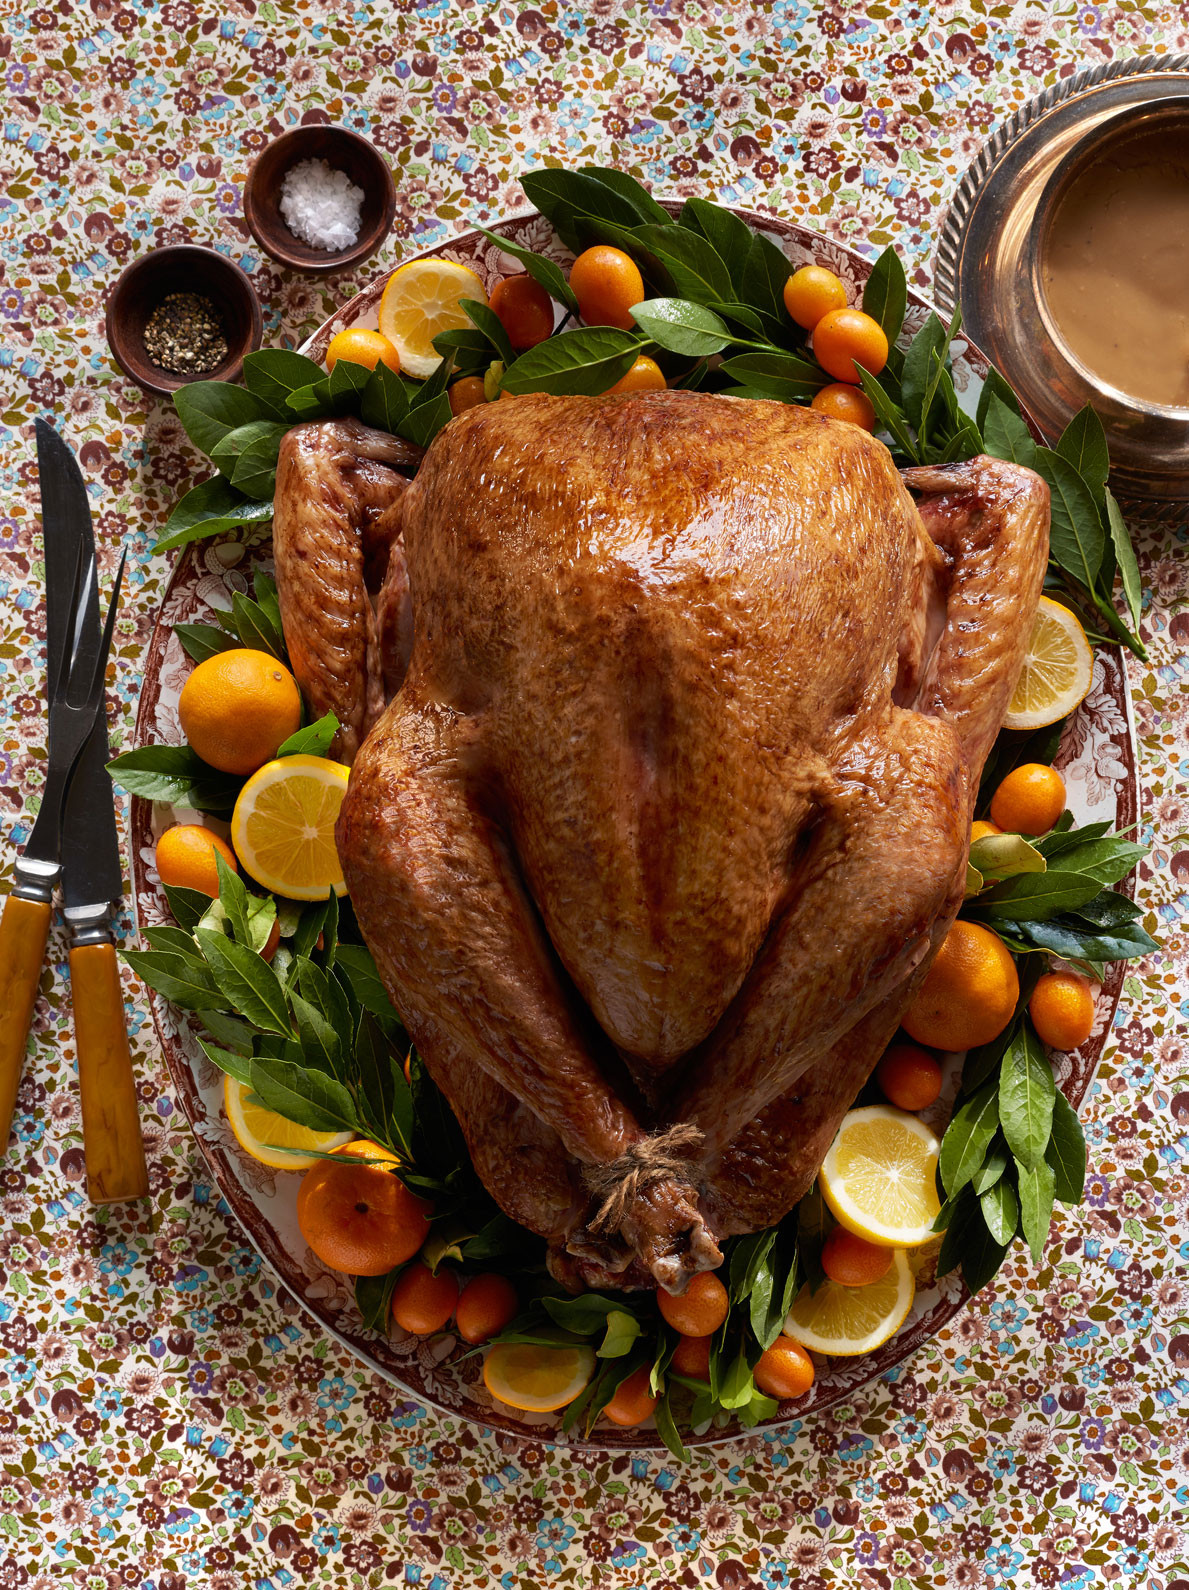 Turkey Images Thanksgiving
 25 Best Thanksgiving Turkey Recipes How To Cook Turkey